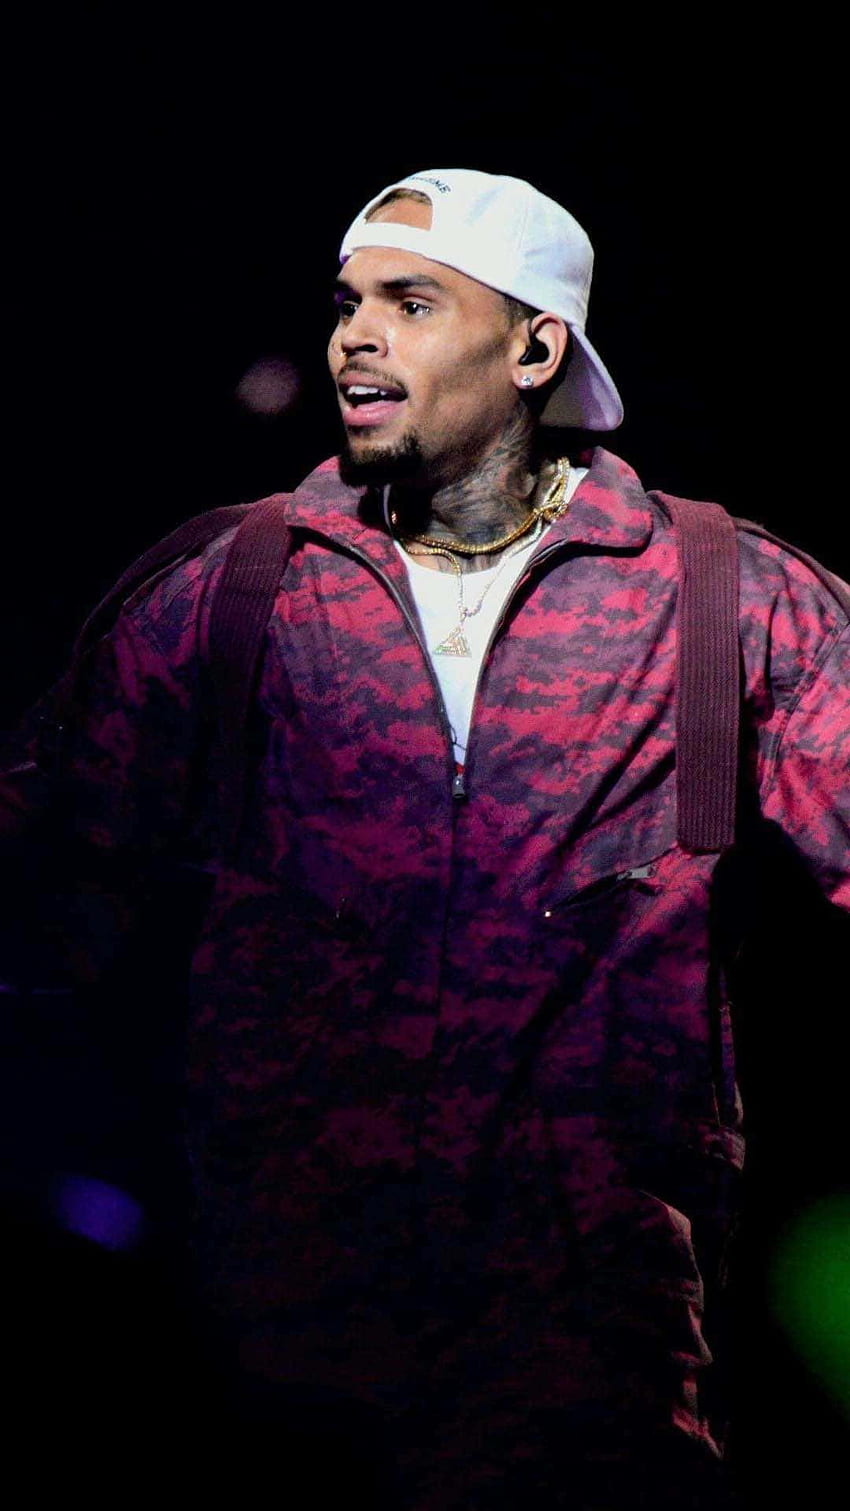 chris brown tumblr backgrounds